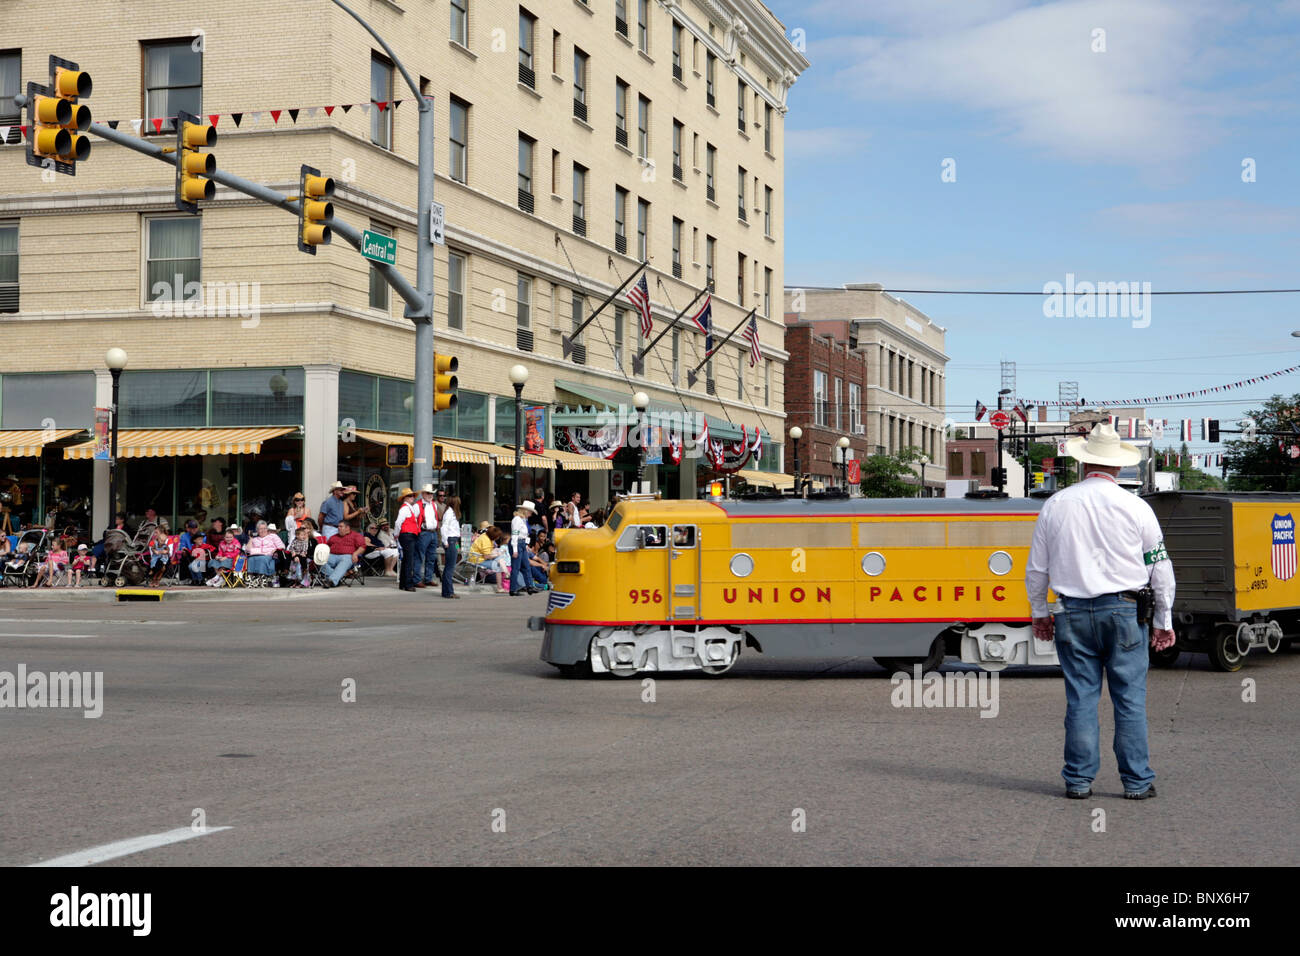 Parade in downtown Cheyenne, Wyoming, during the Frontier Days annual celebration. Stock Photo